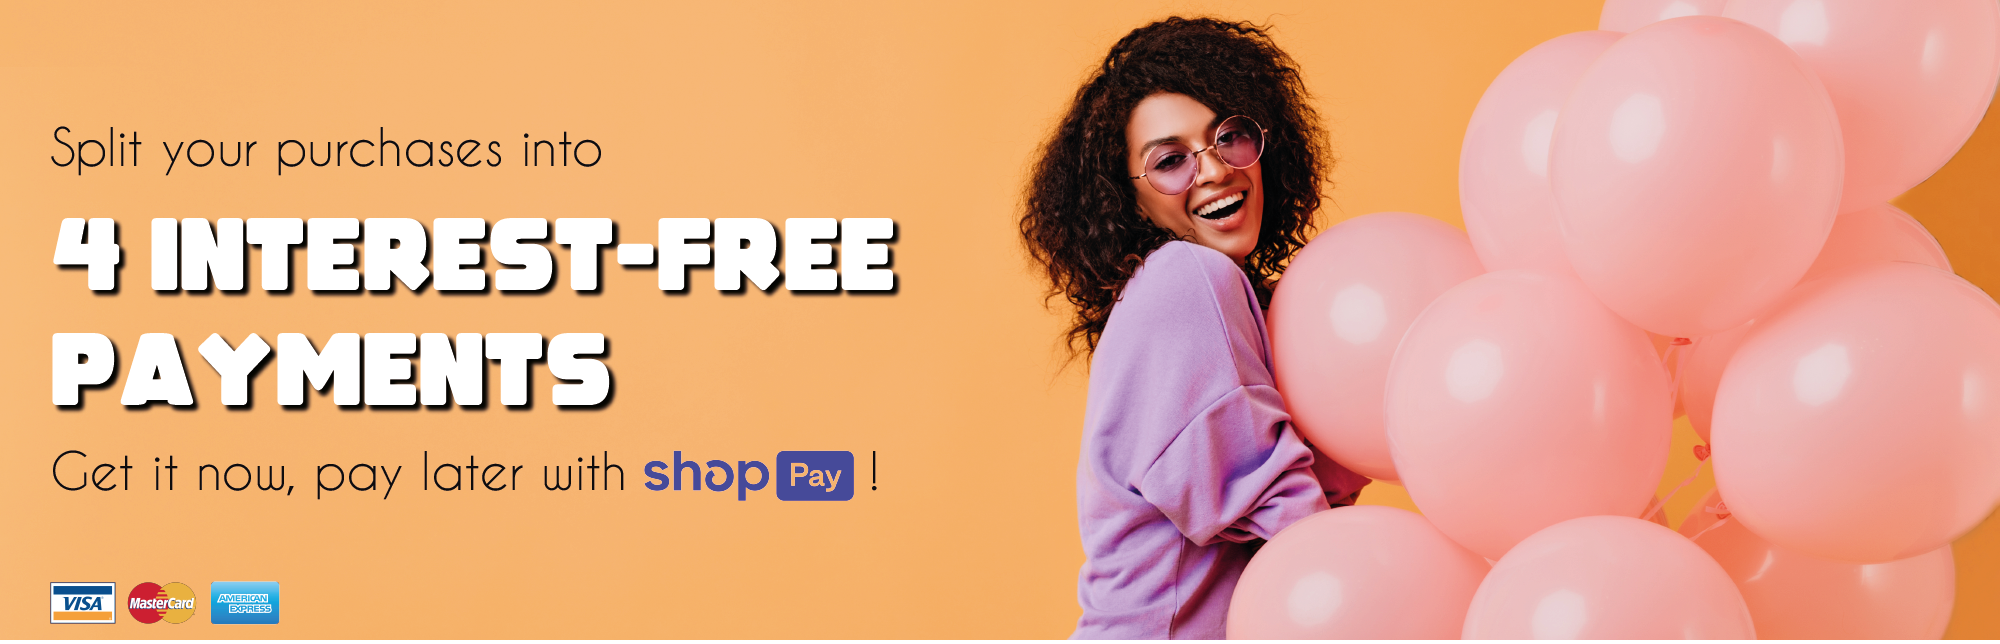 Split your purchases into 4 interest free payments, get it now, pay later with shop pay!